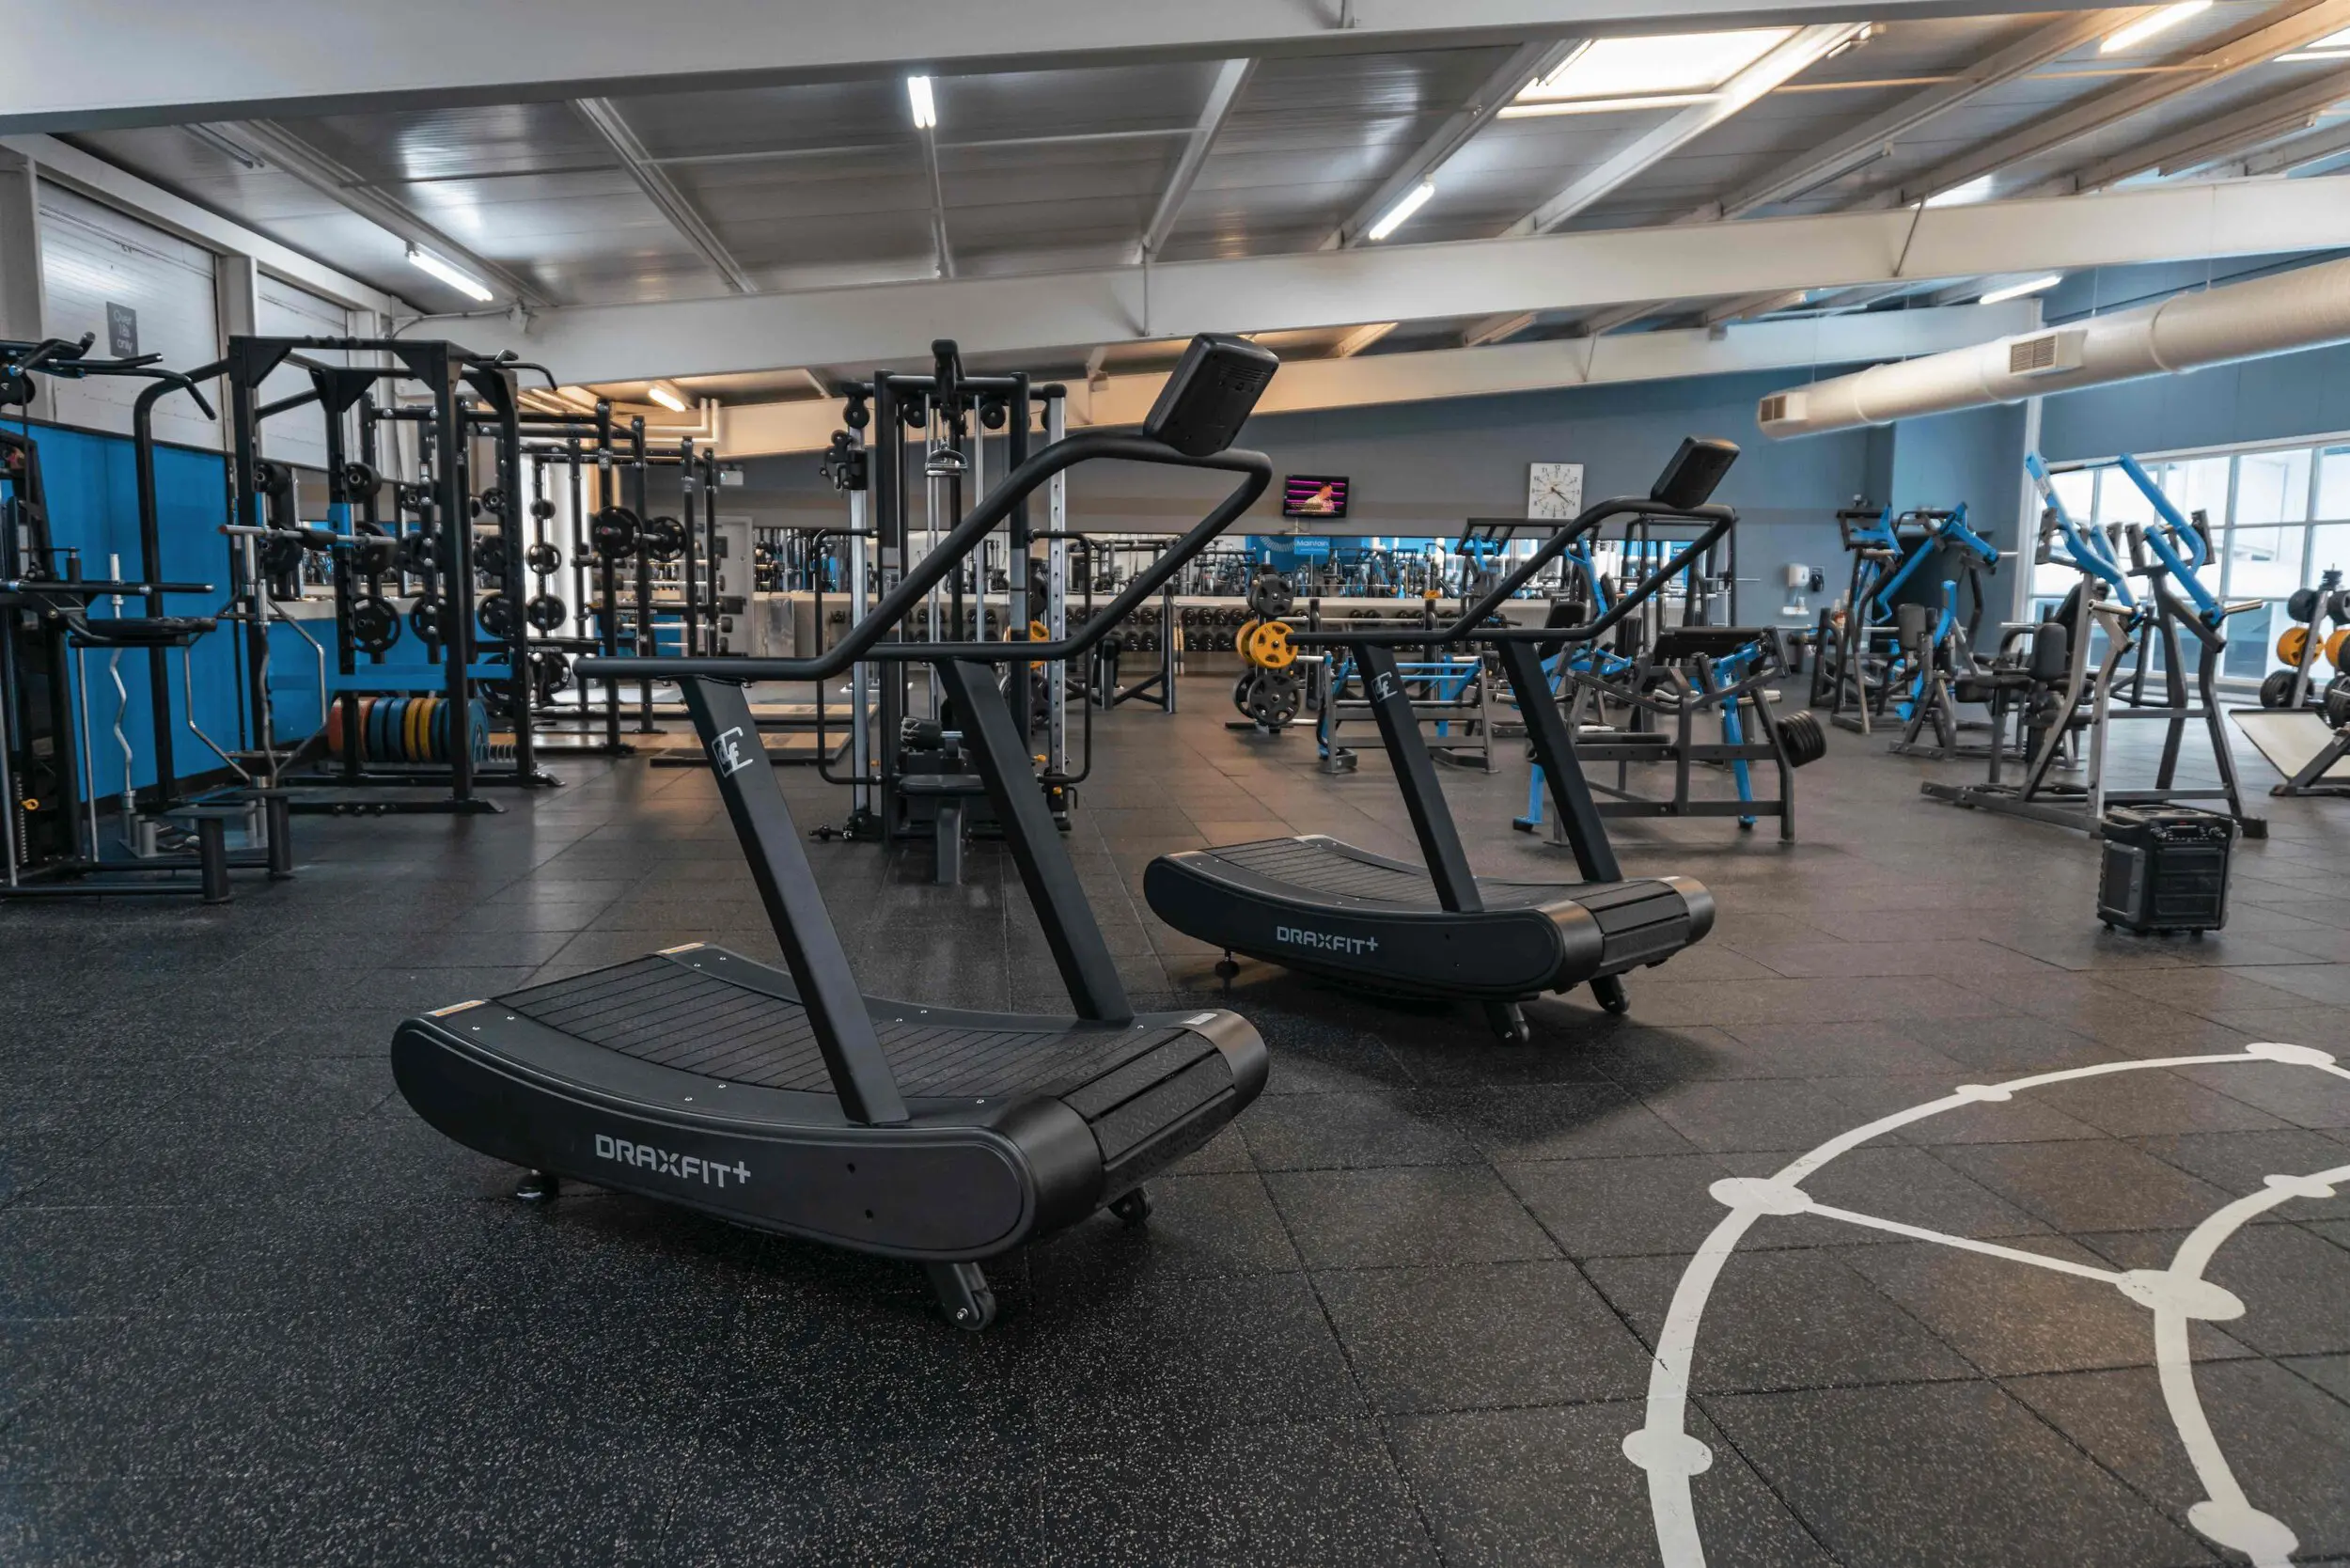 Total fitness gym equipment